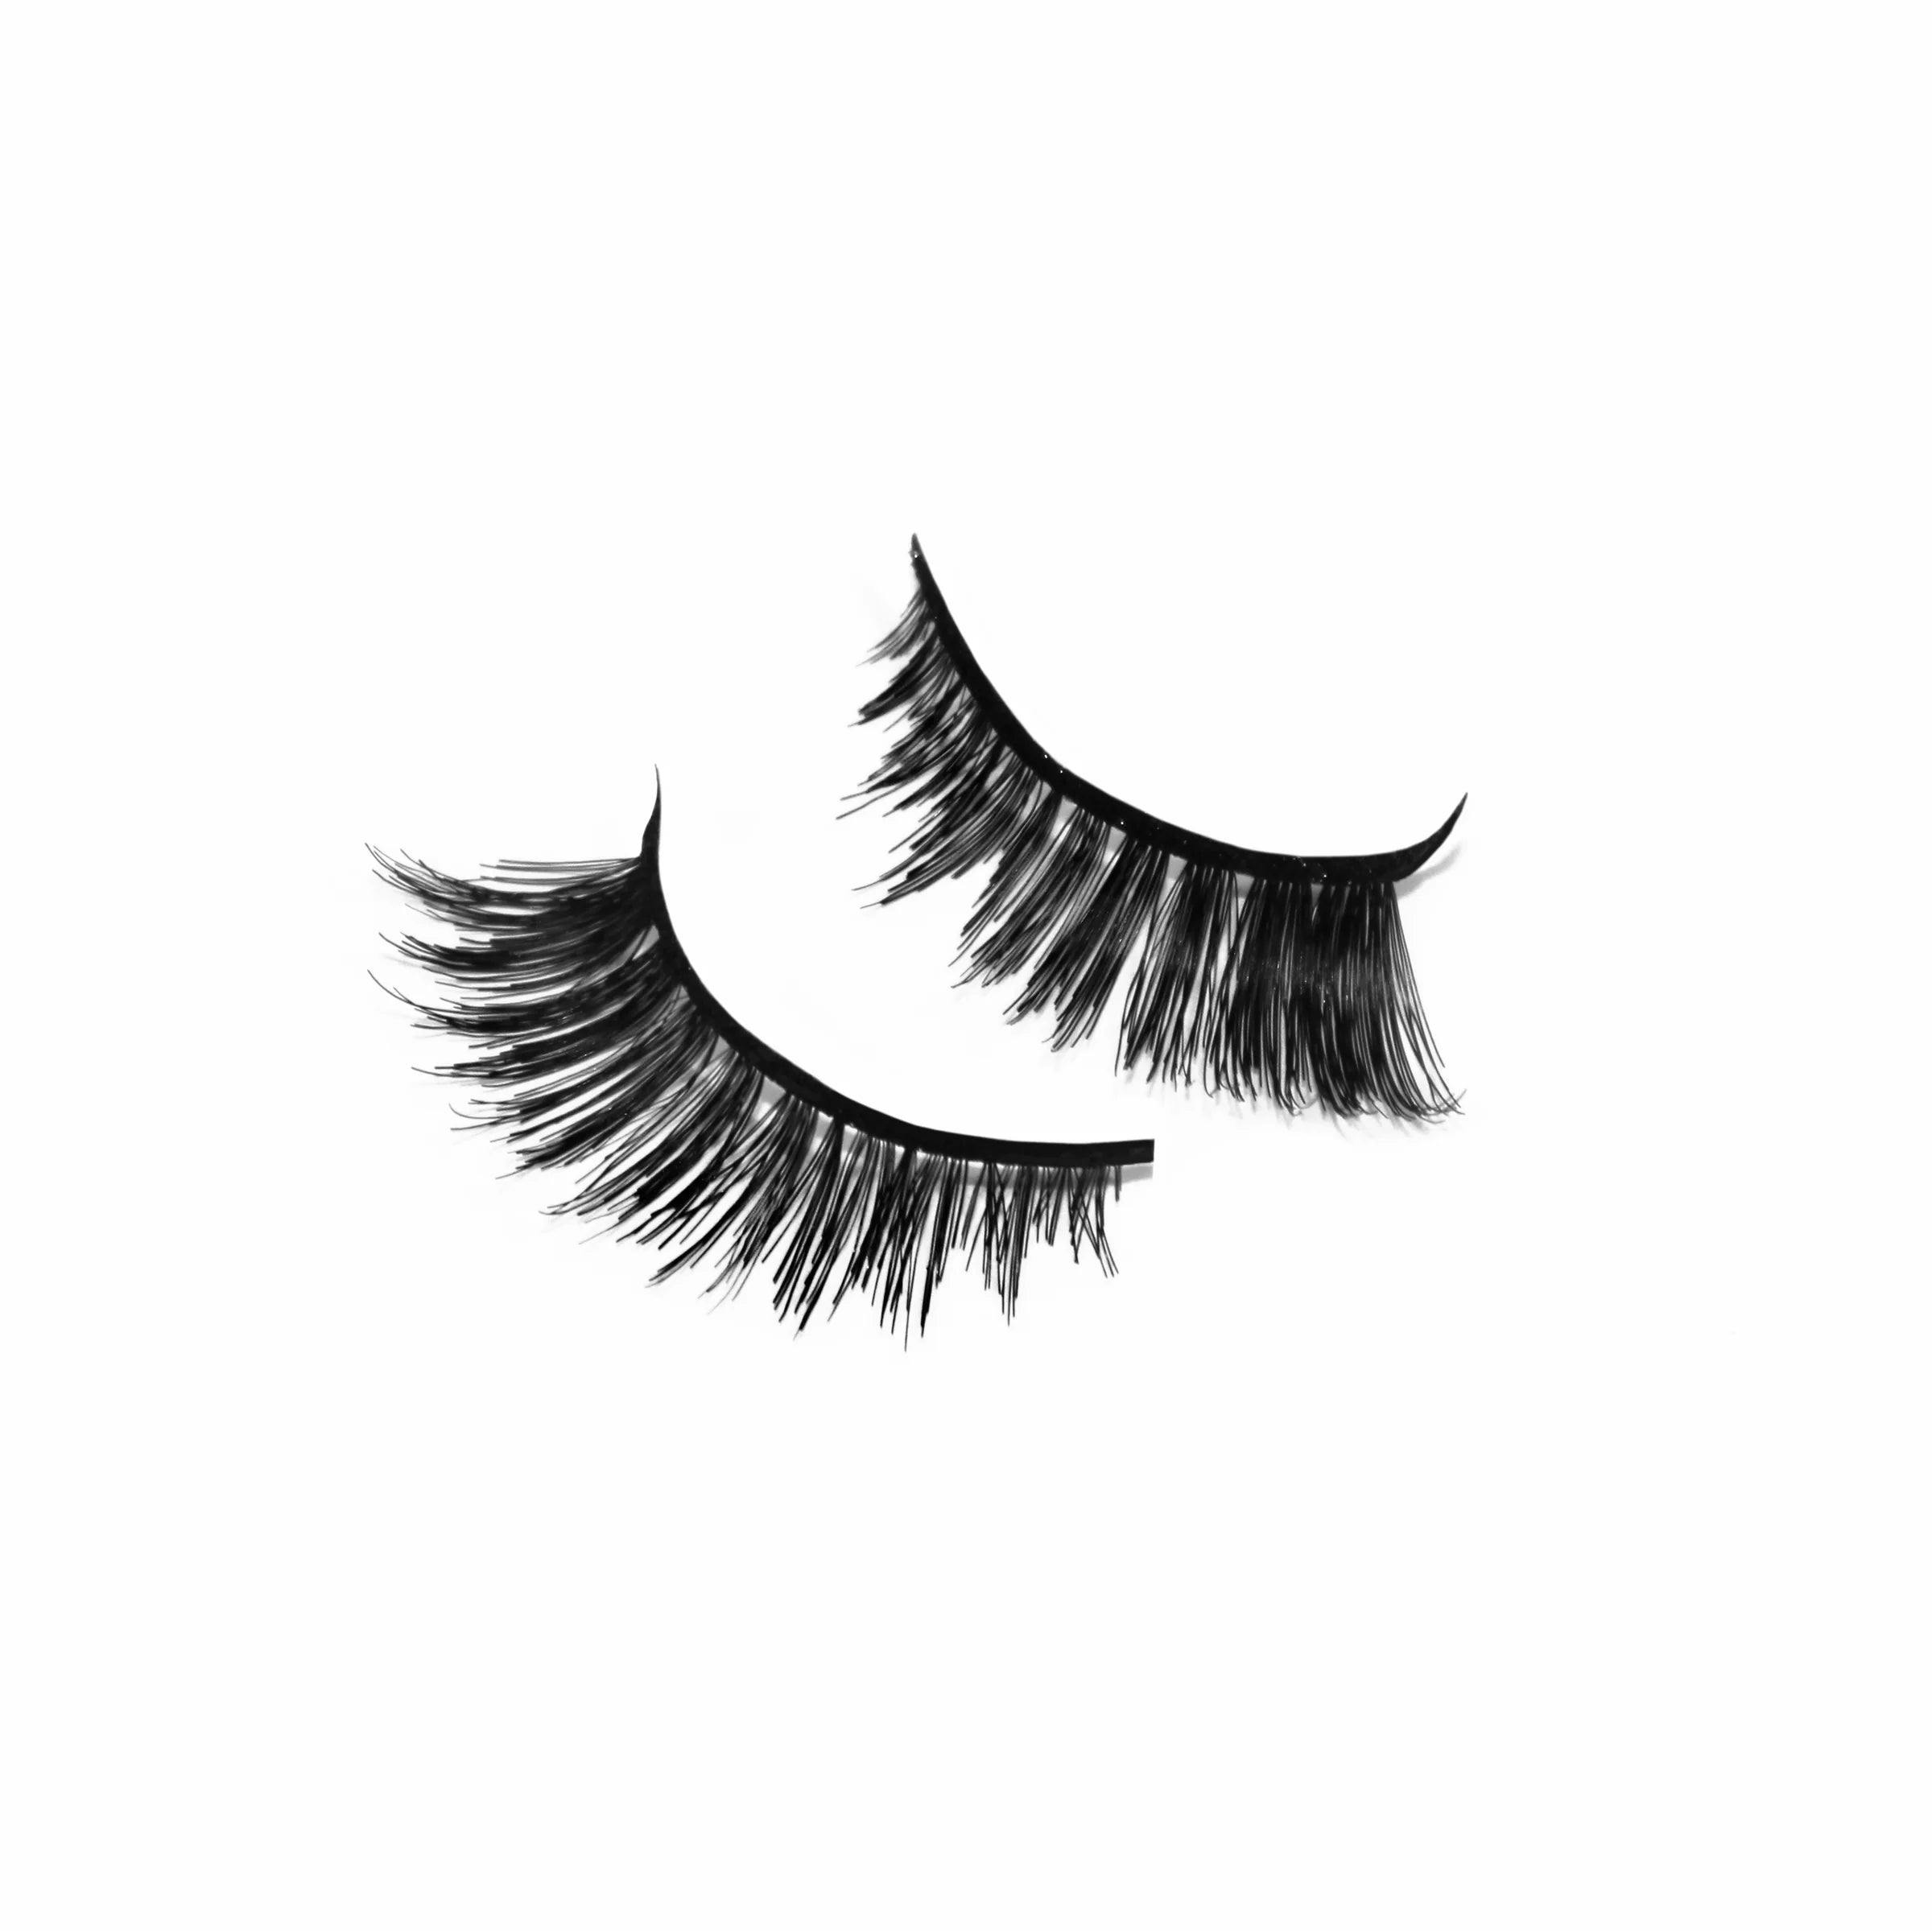 1000 Hour Classic Collection Lashes - Kitten Black #554